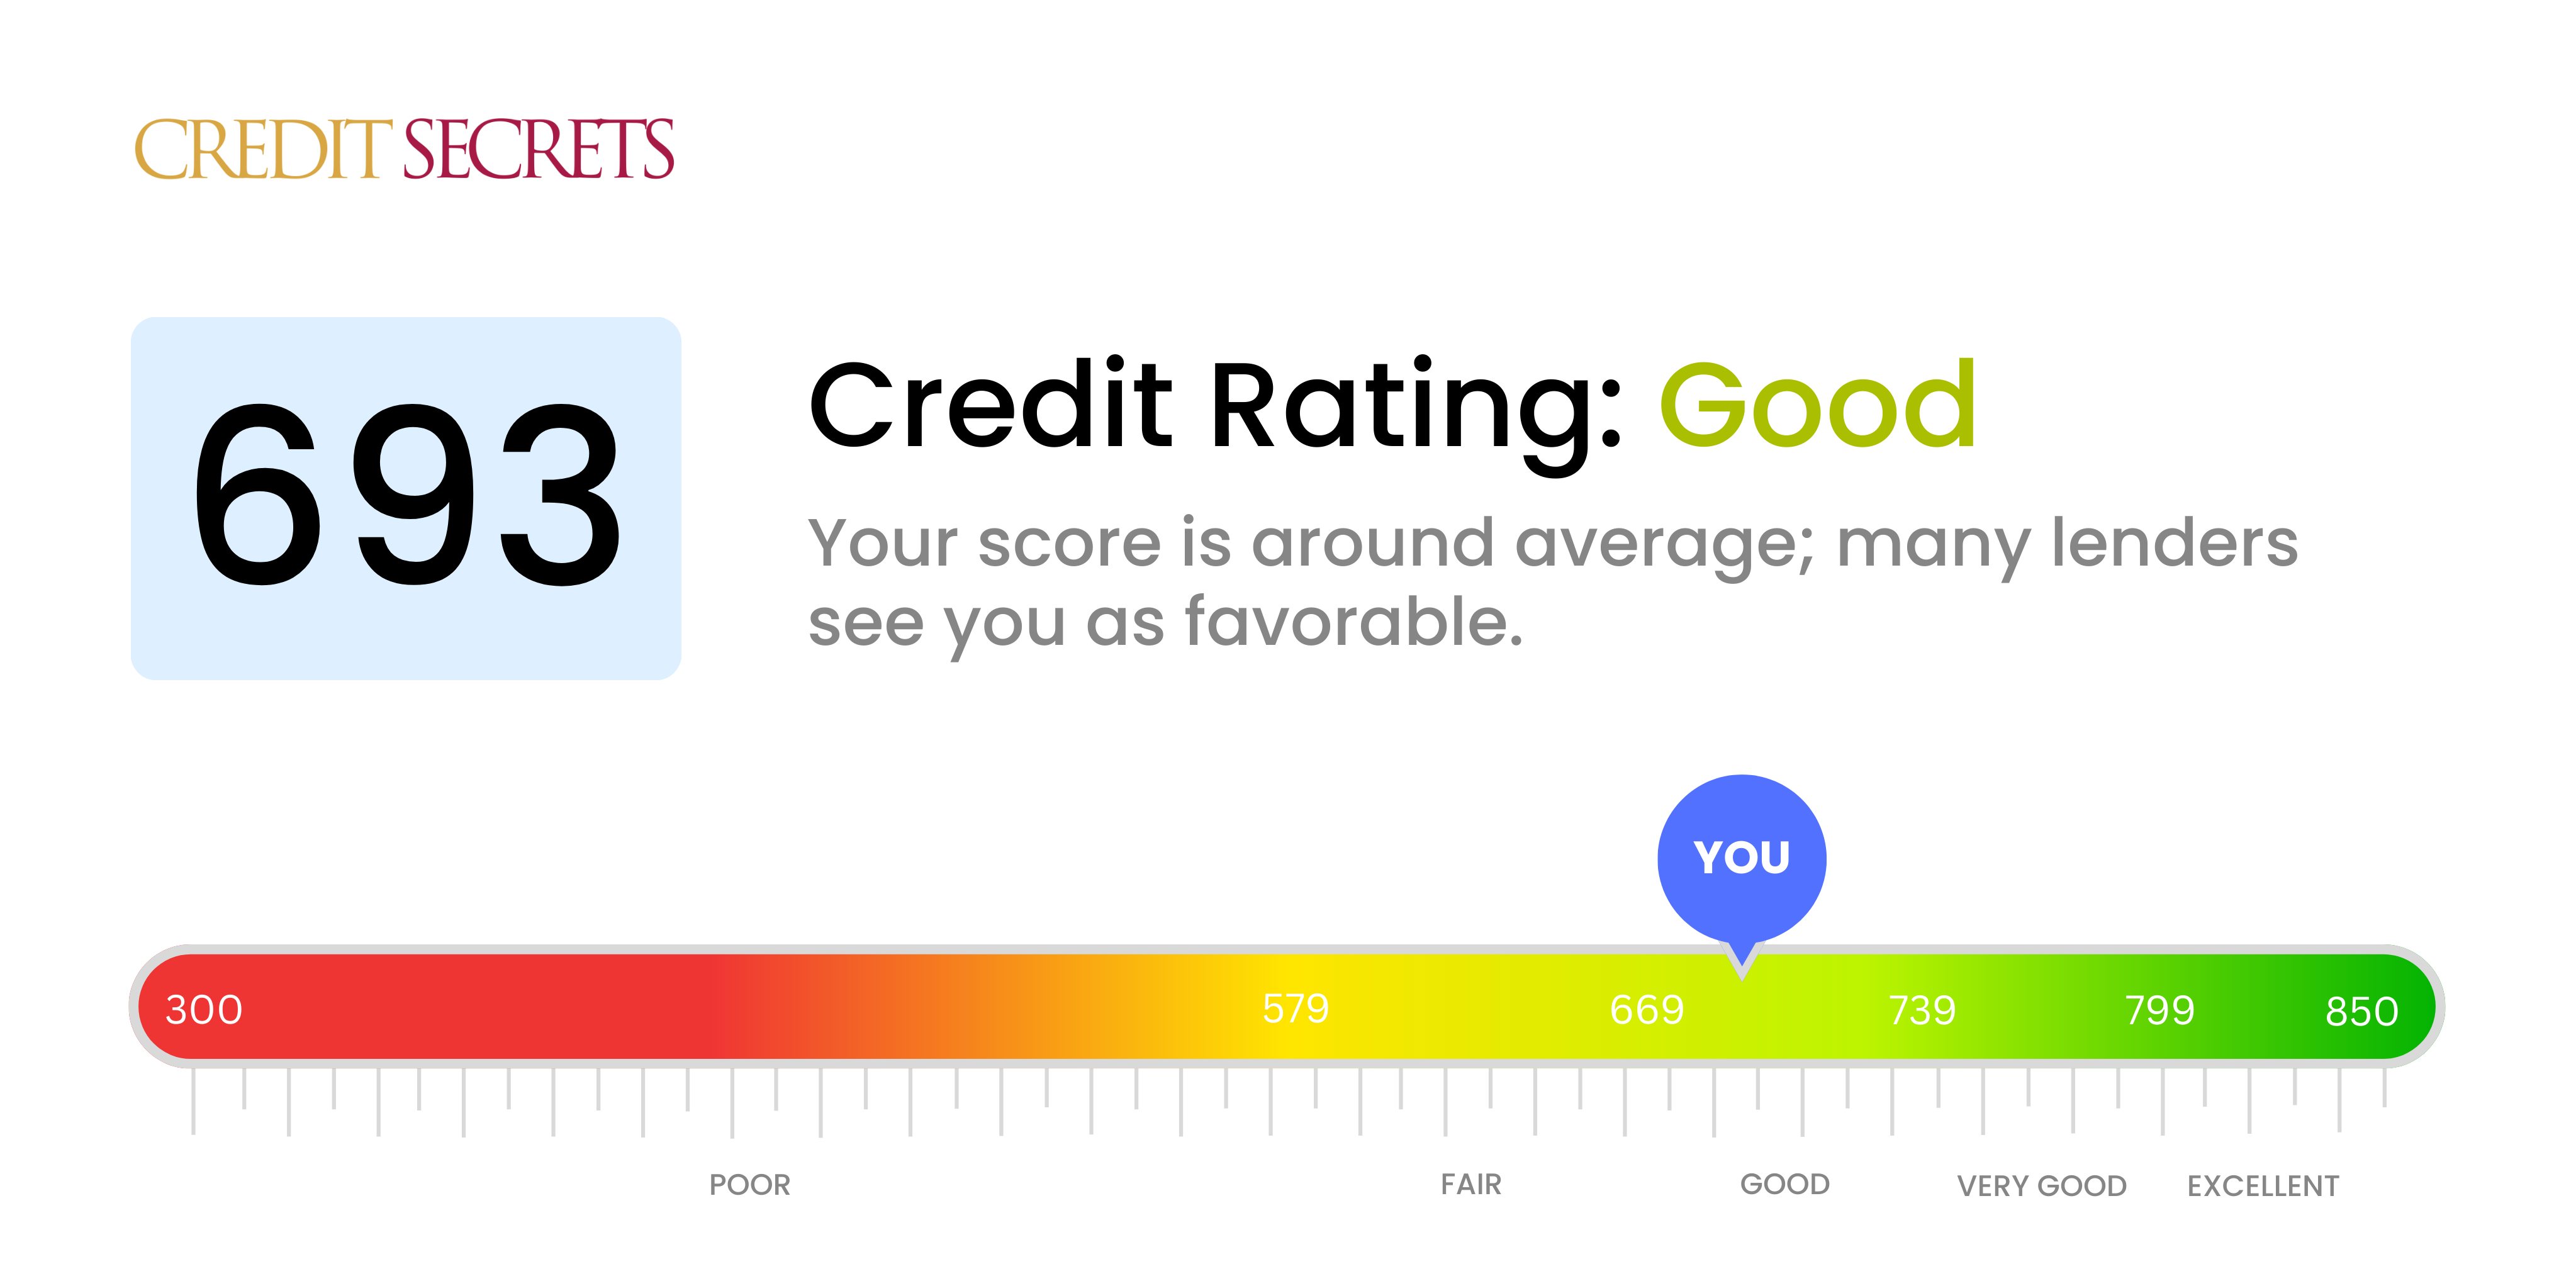 Is 693 a good credit score?